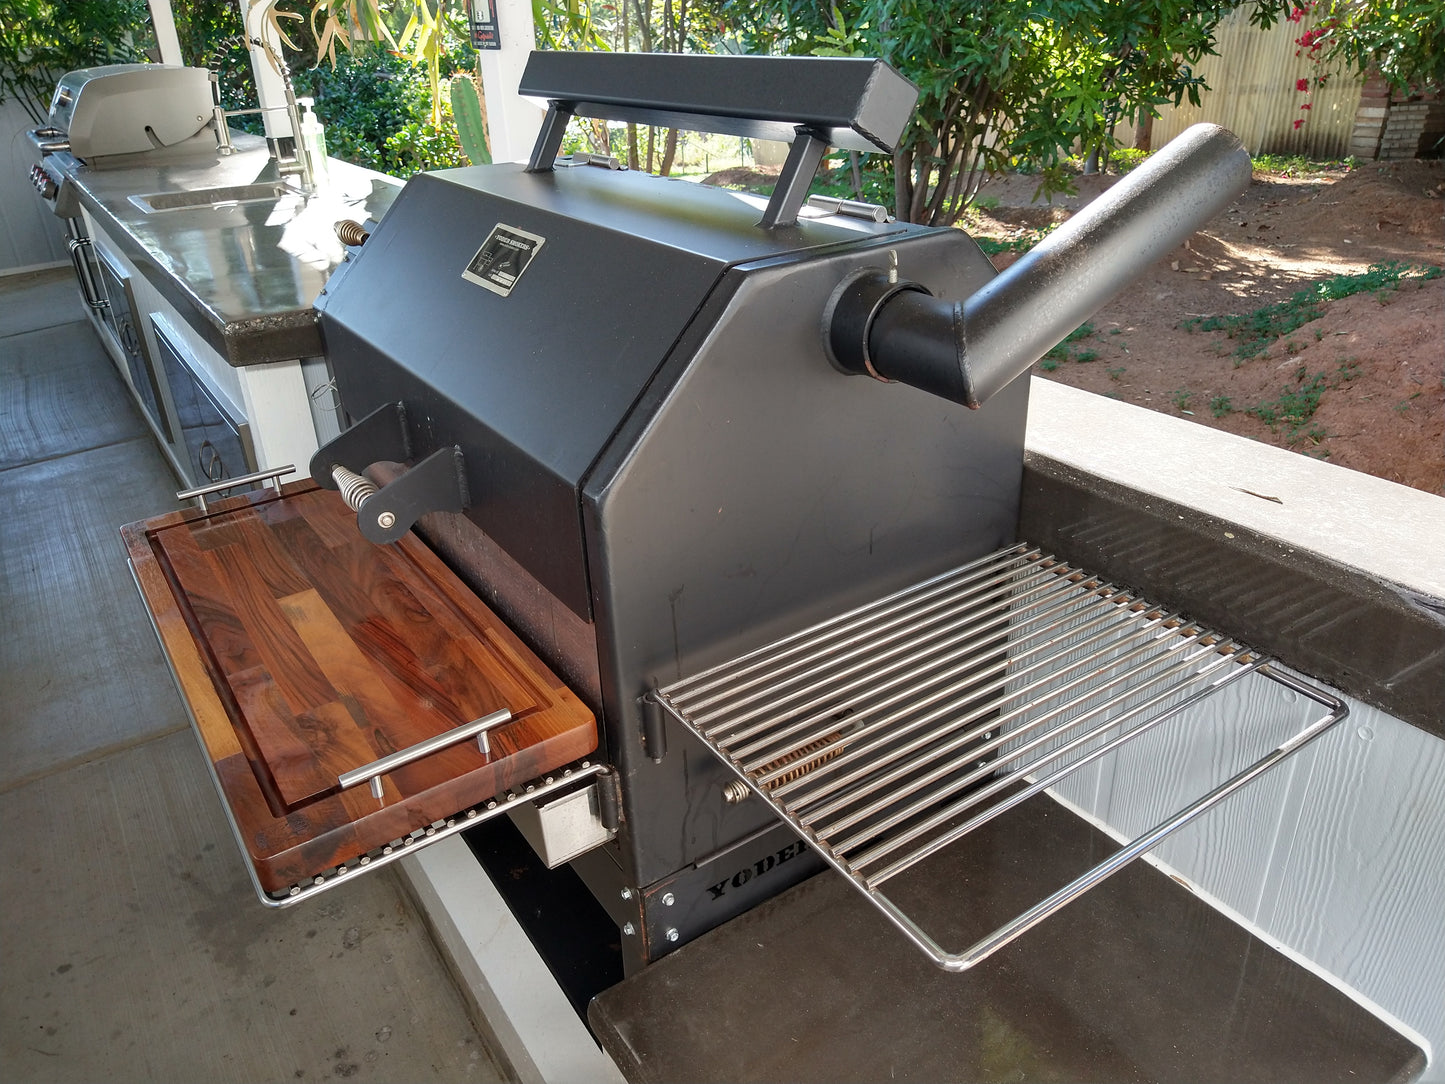 Cleaning a Pellet Grill - Yoder YS640s 